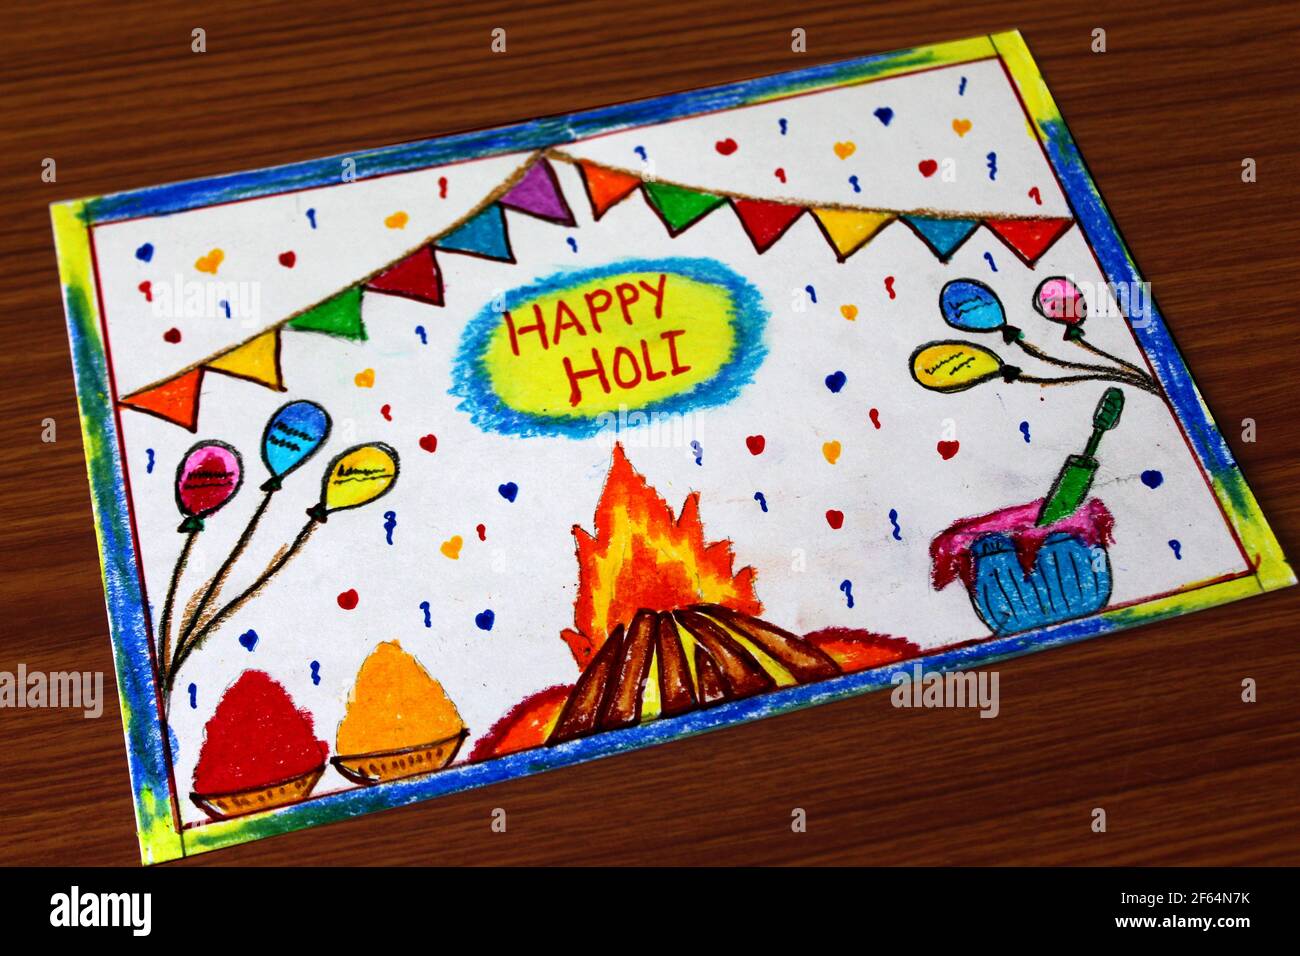 Image of Happy Holi Abstract Painting Art-HS771320-Picxy-saigonsouth.com.vn